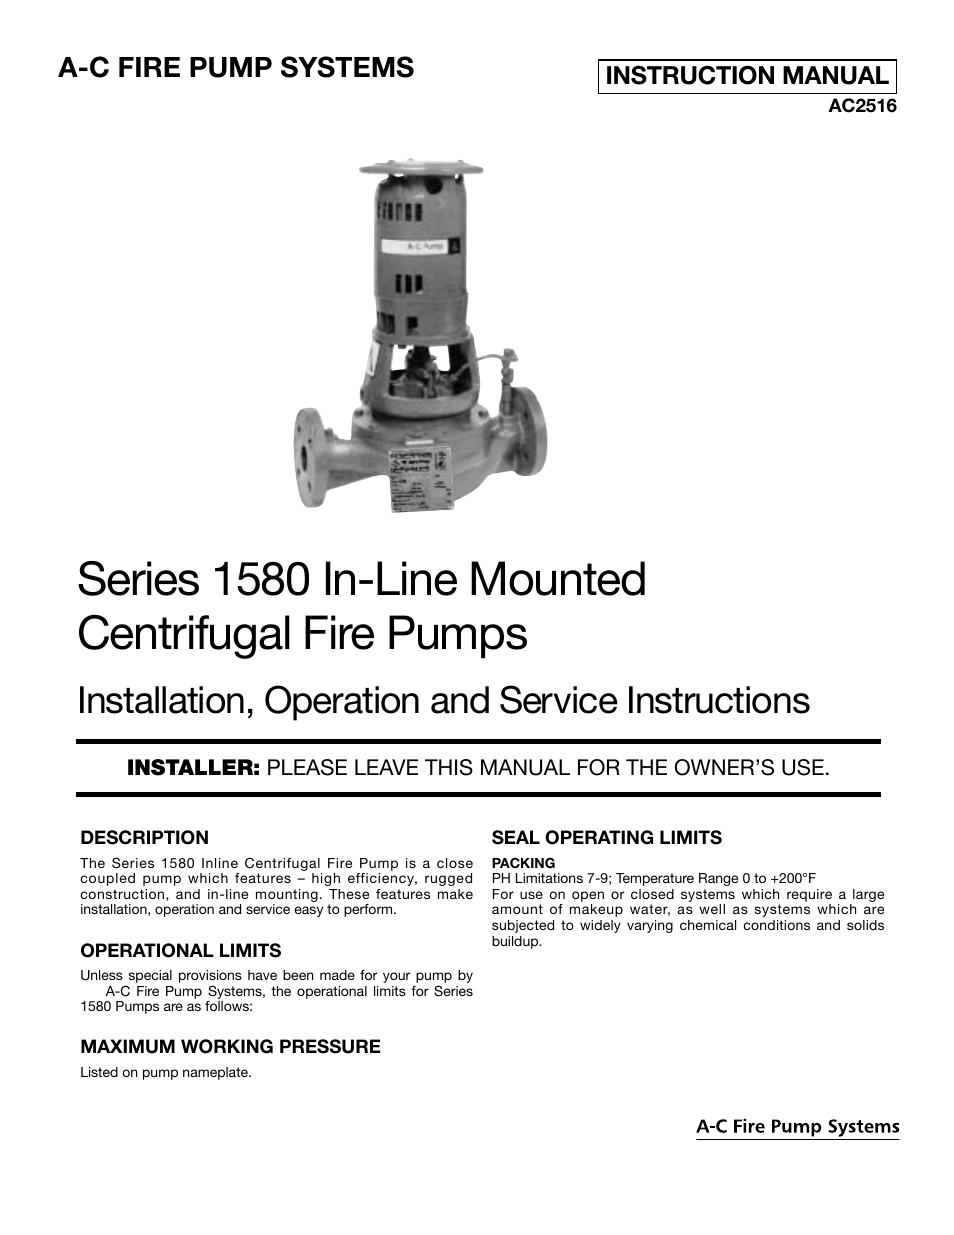 1580 Series In-Line Mounted Centrifugal Fire Pumps AC2516